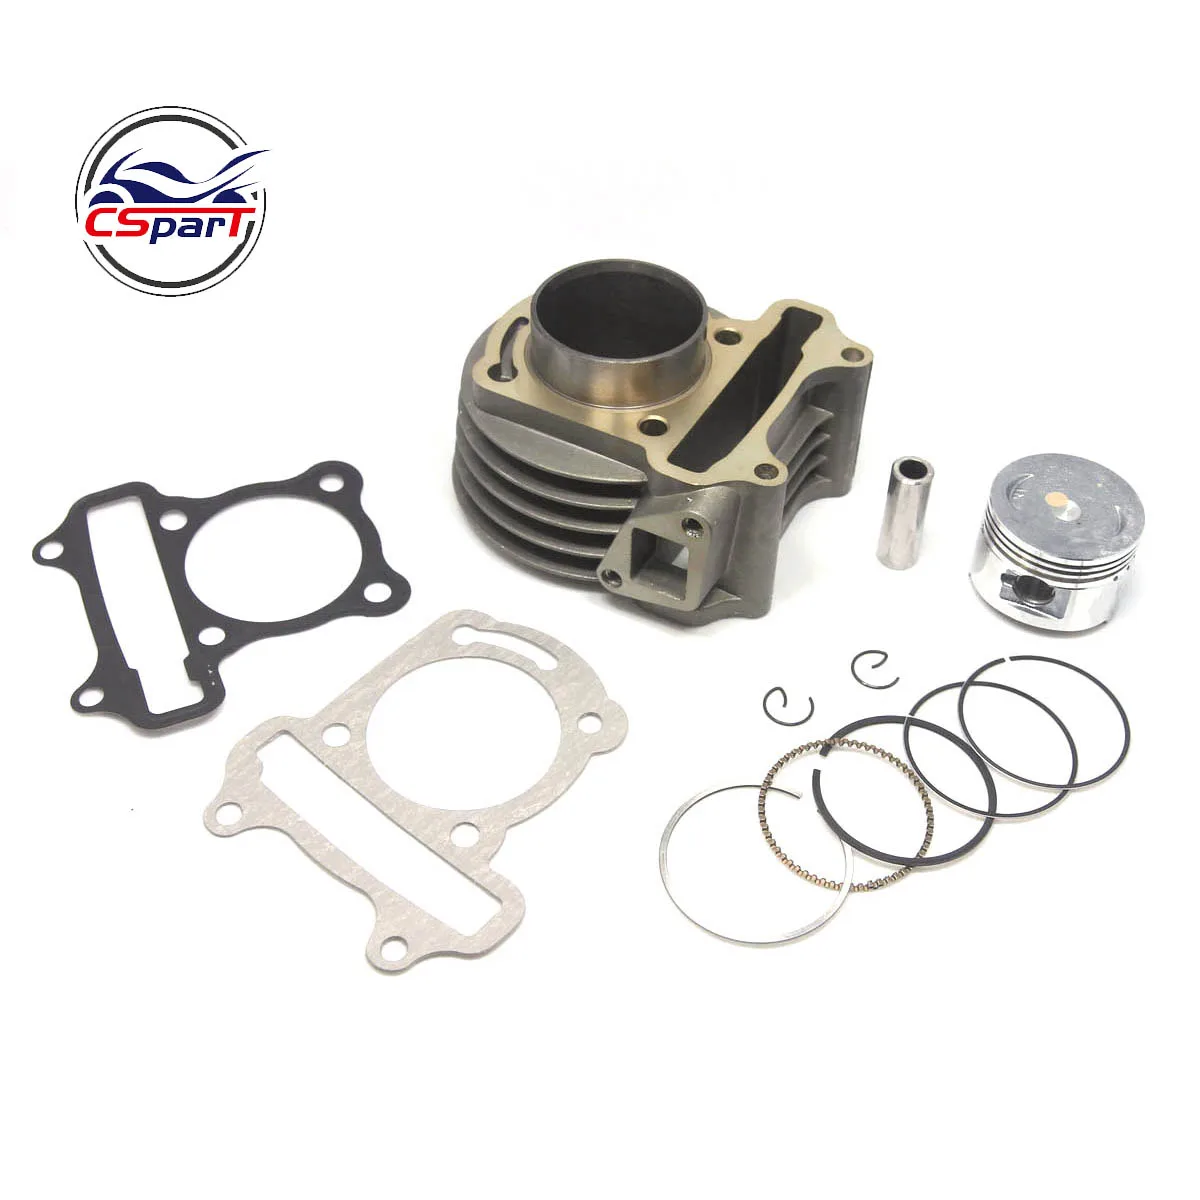 Trkimal Performance Upgrade Big Bore Cylinder Kit GY6 80cc 47mm for GY6 49cc 50cc 139QMB ATV Scooter Moped Go Kart 